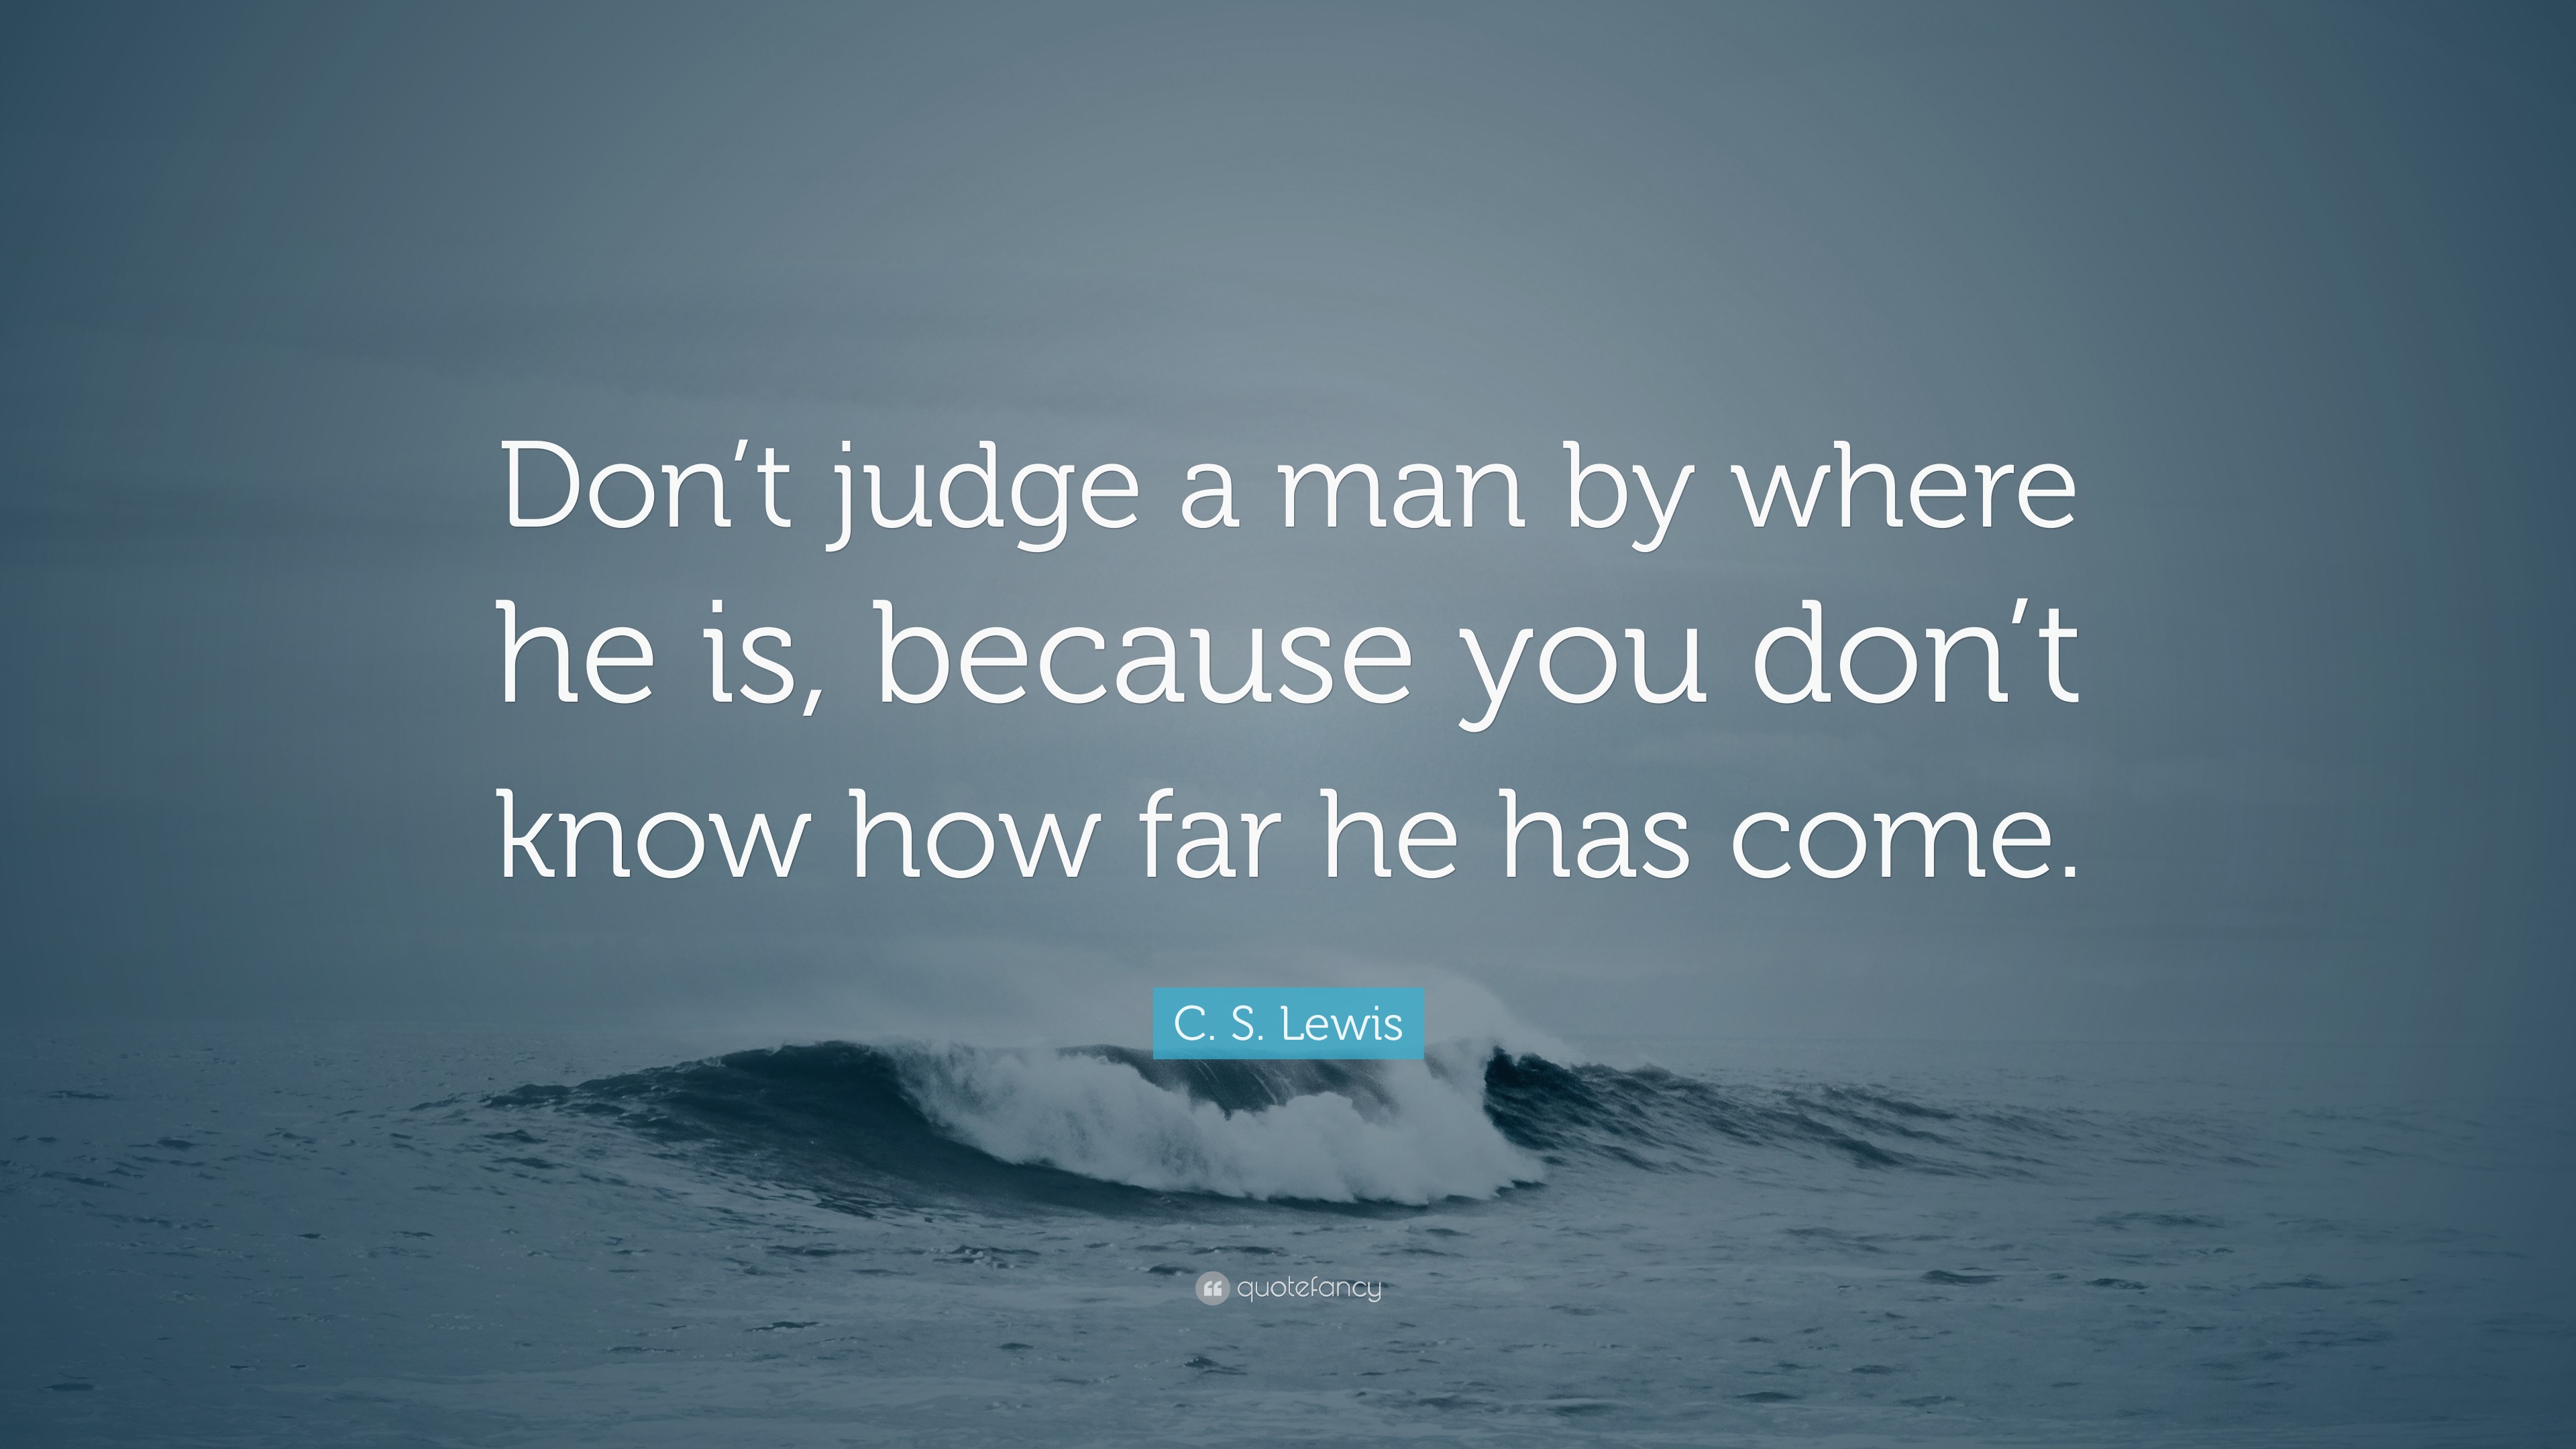 C. S. Lewis Quote: "Don’t judge a man by where he is, becaus